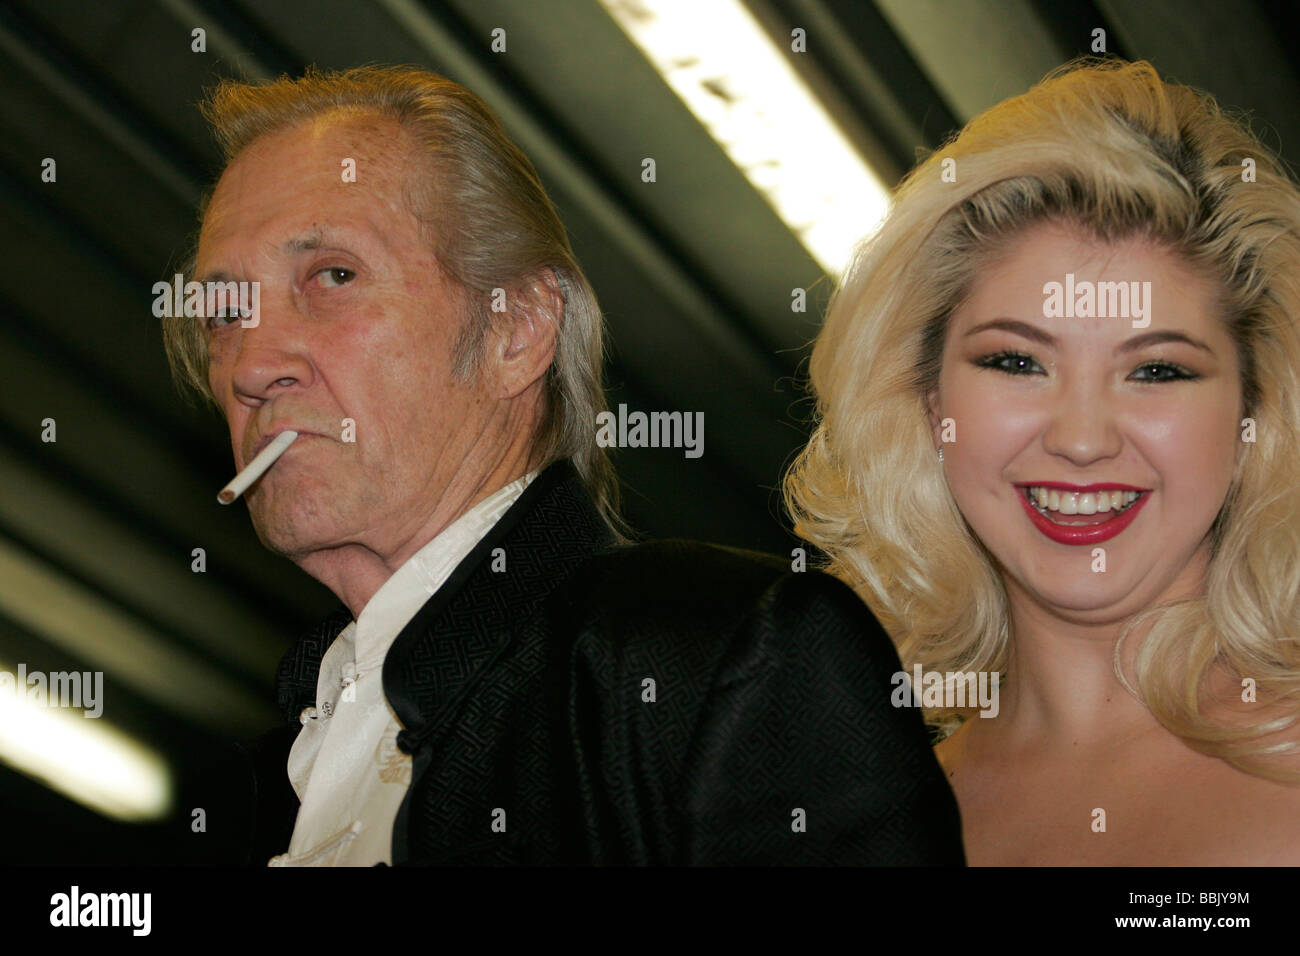 Famous Hollywood actor David Carradine is pictured smoking with smiling Kazakh actress at Eurasia film festival in Almaty, Kazakhstan fall 2006 Stock Photo